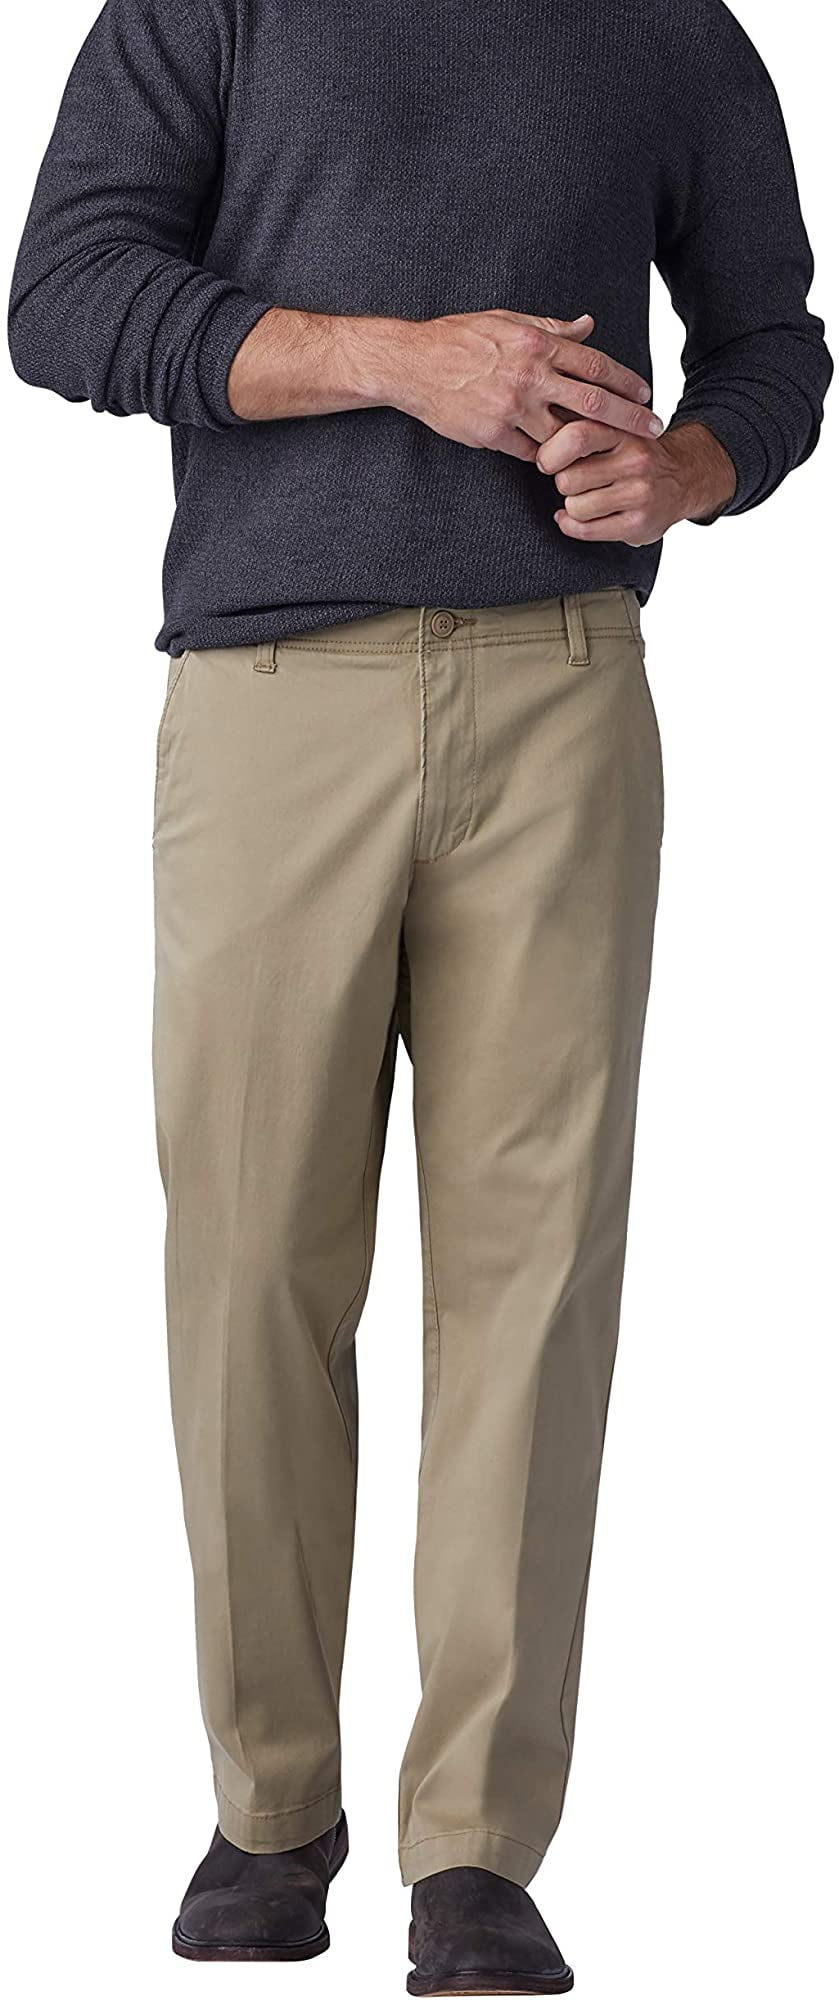 Lee Men's Performance Series Extreme Comfort Straight Fit Pant 